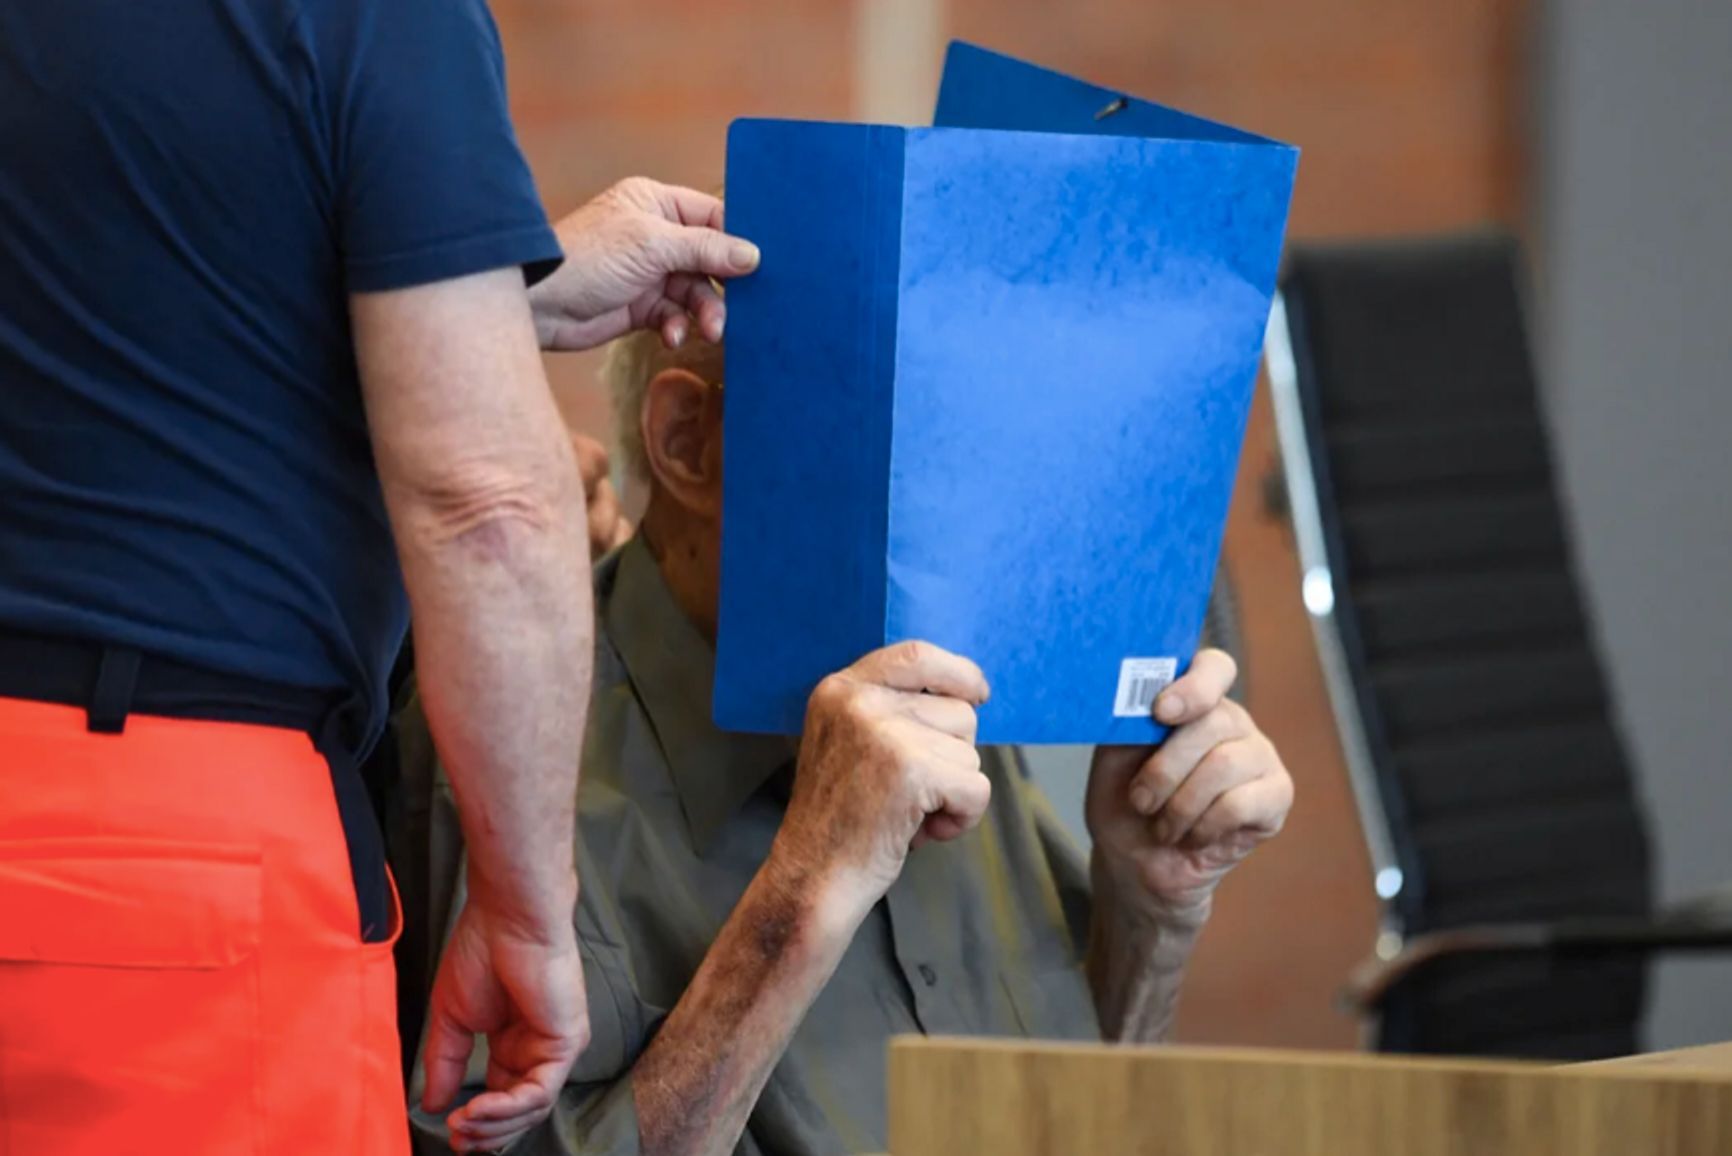 Josef Schutz obscures his face with a folder in all photographs from the court